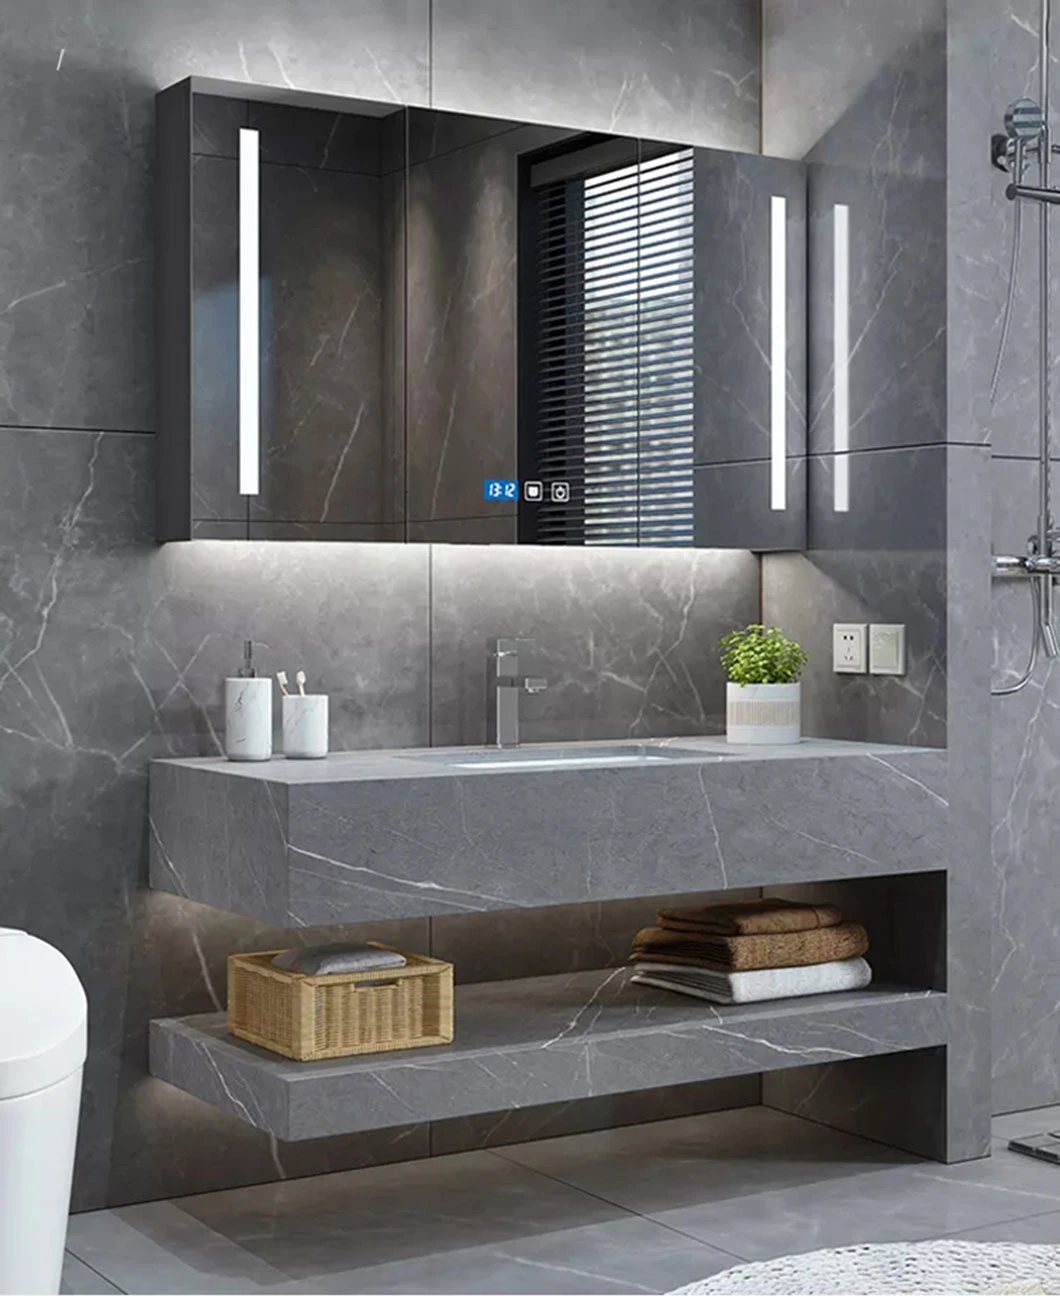 Solid Surface Rock Plate Double Basin Toilet Porcelain Wall Hung Vanity Sink Bathroom Cabinet